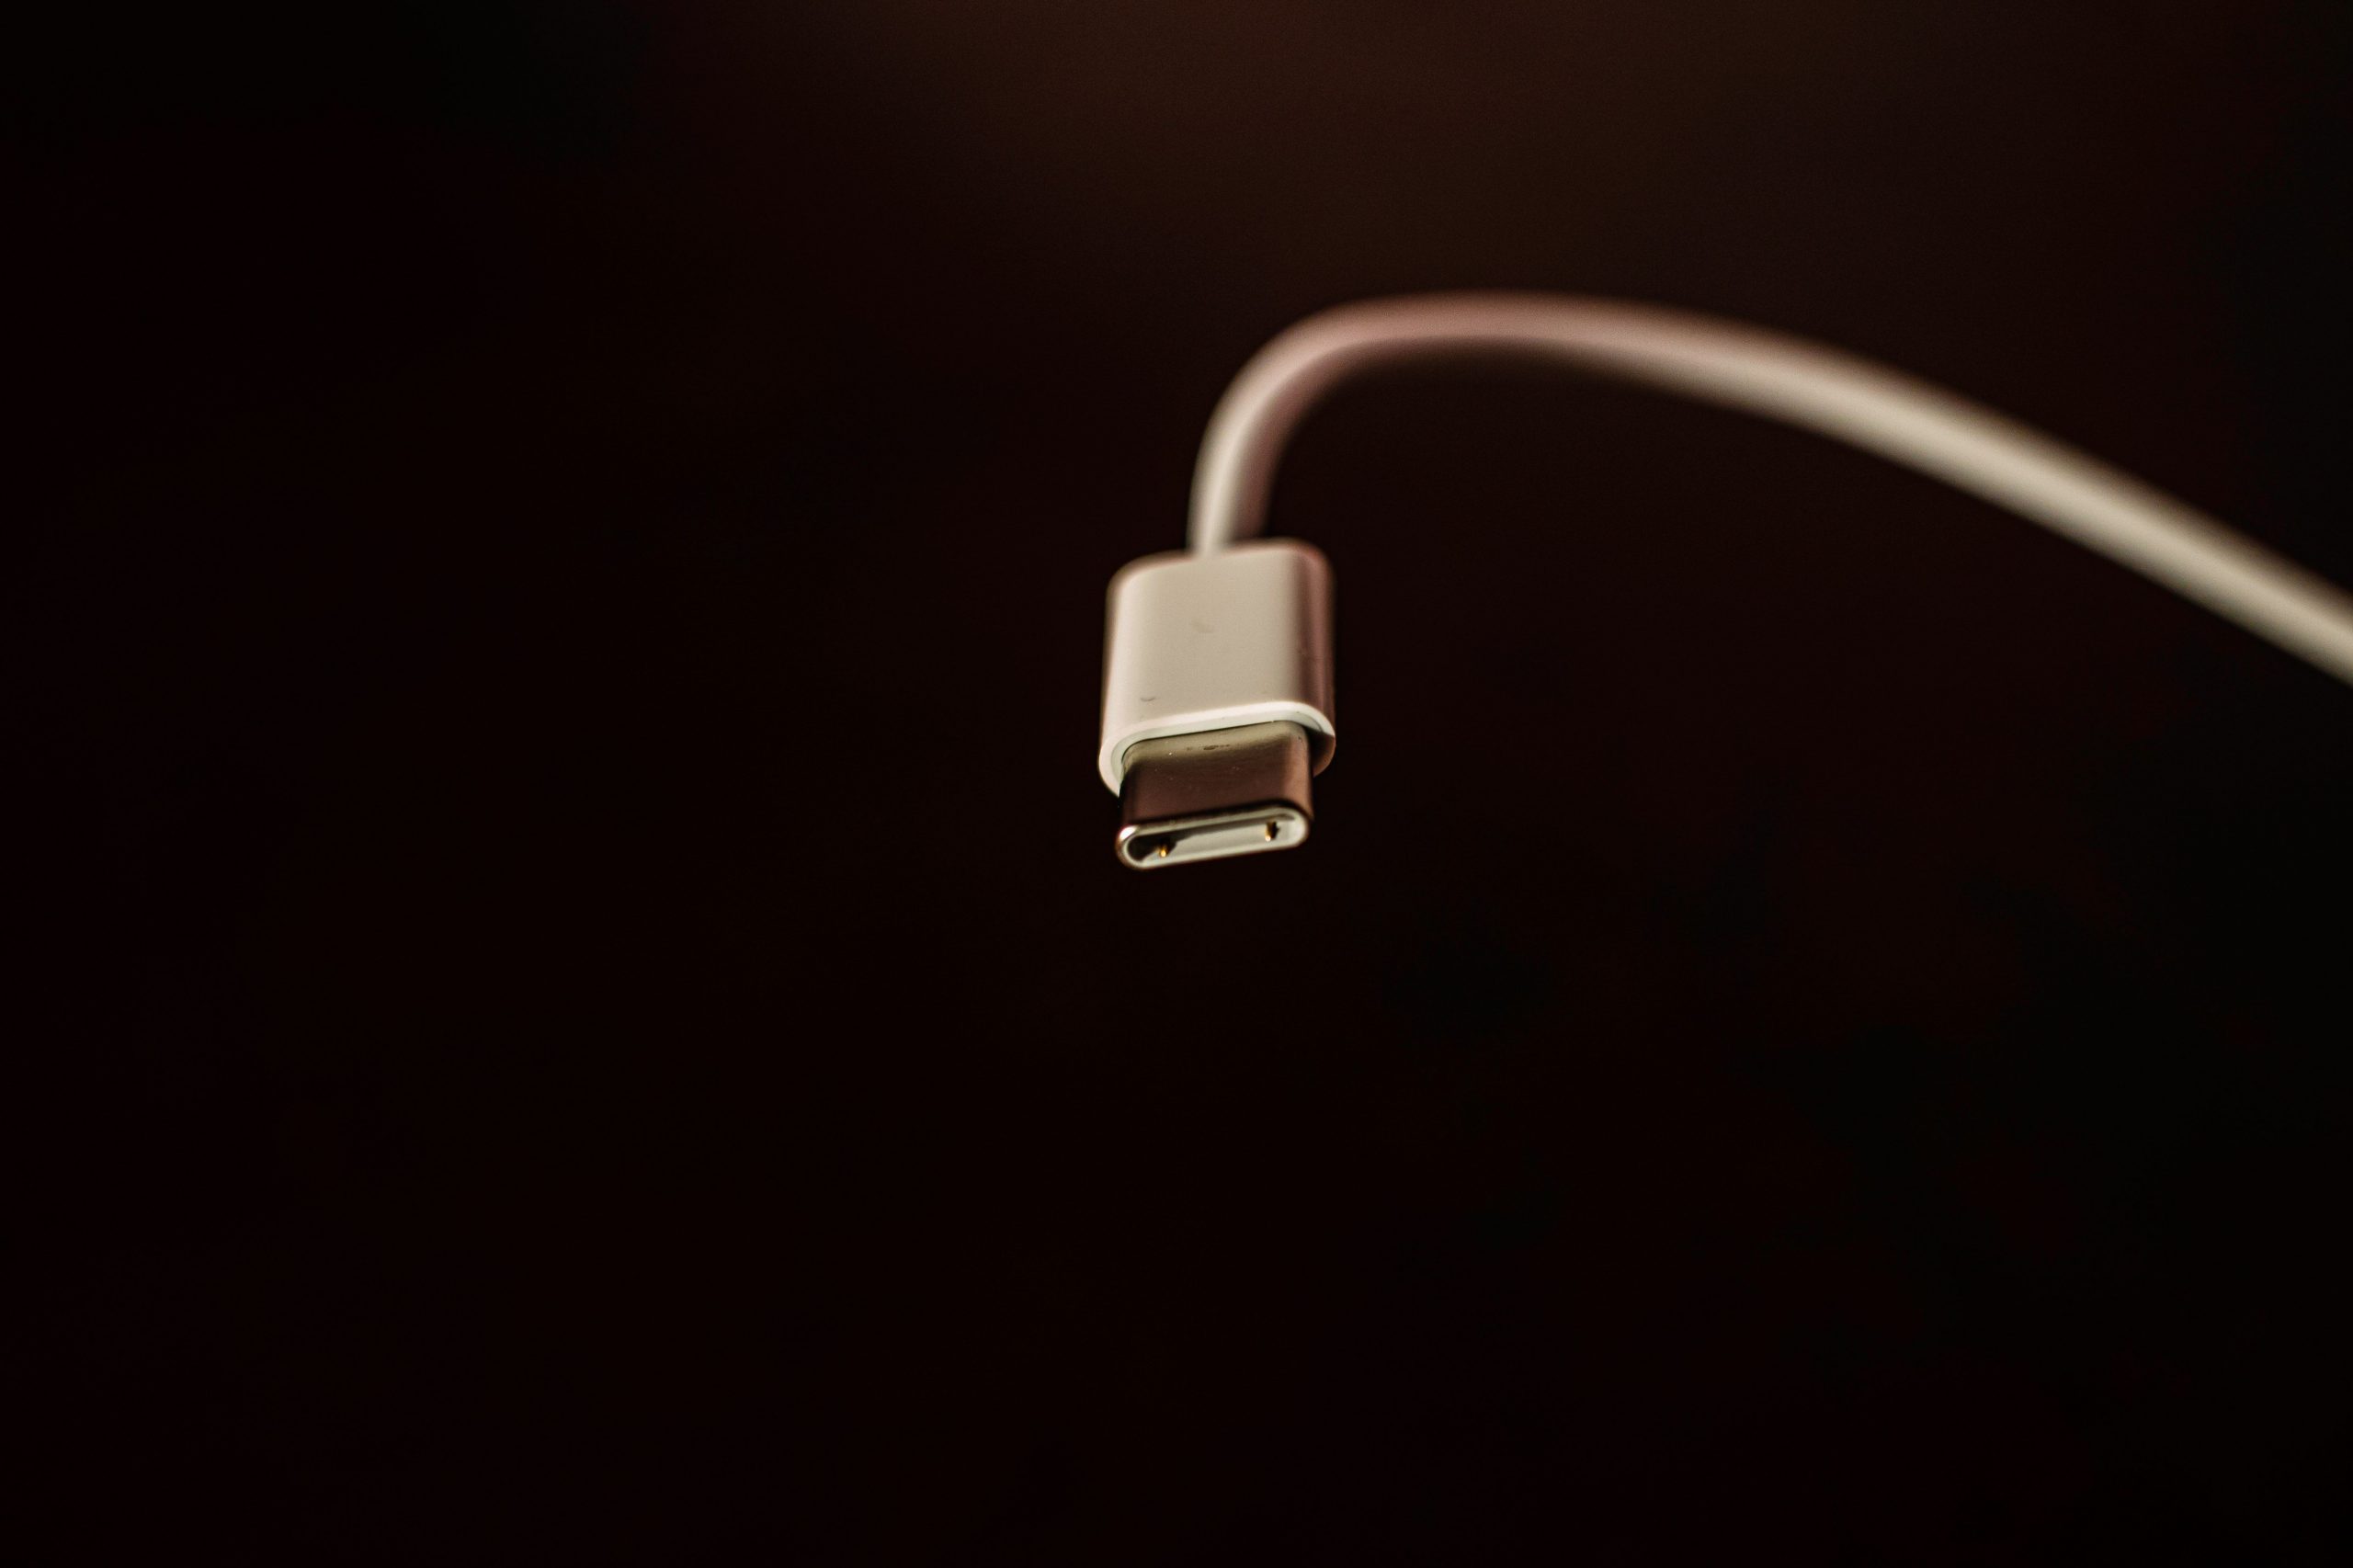 EU passes new law making USB-C standard charger, Apple to be most affected